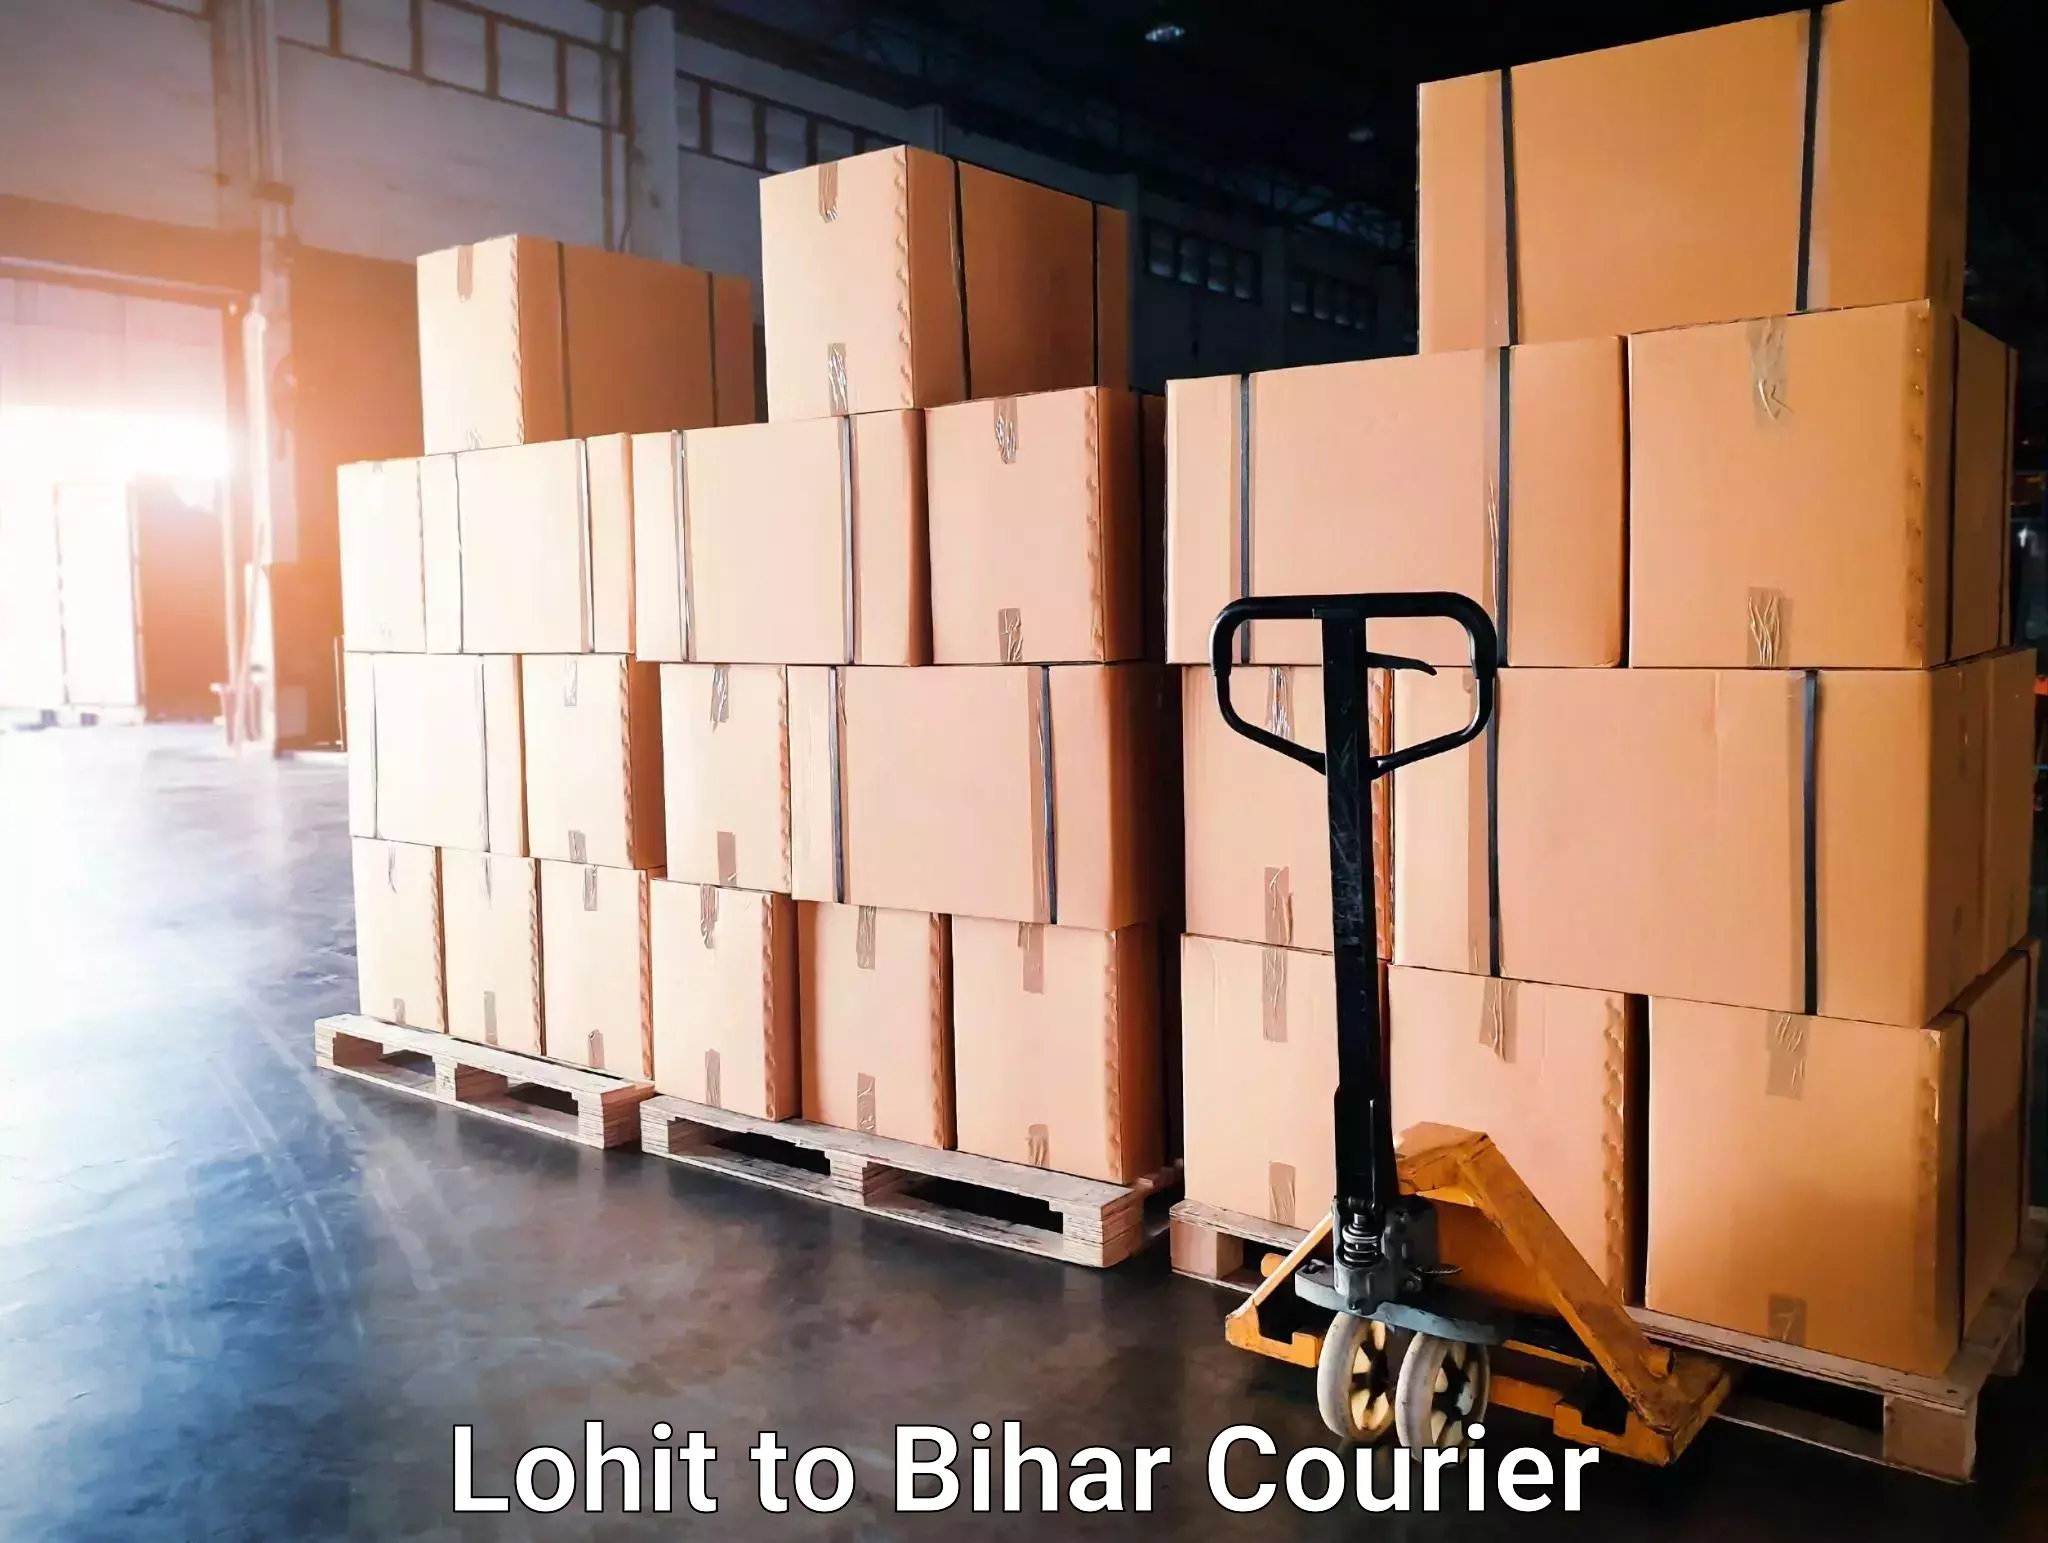 Courier service booking Lohit to Bihar